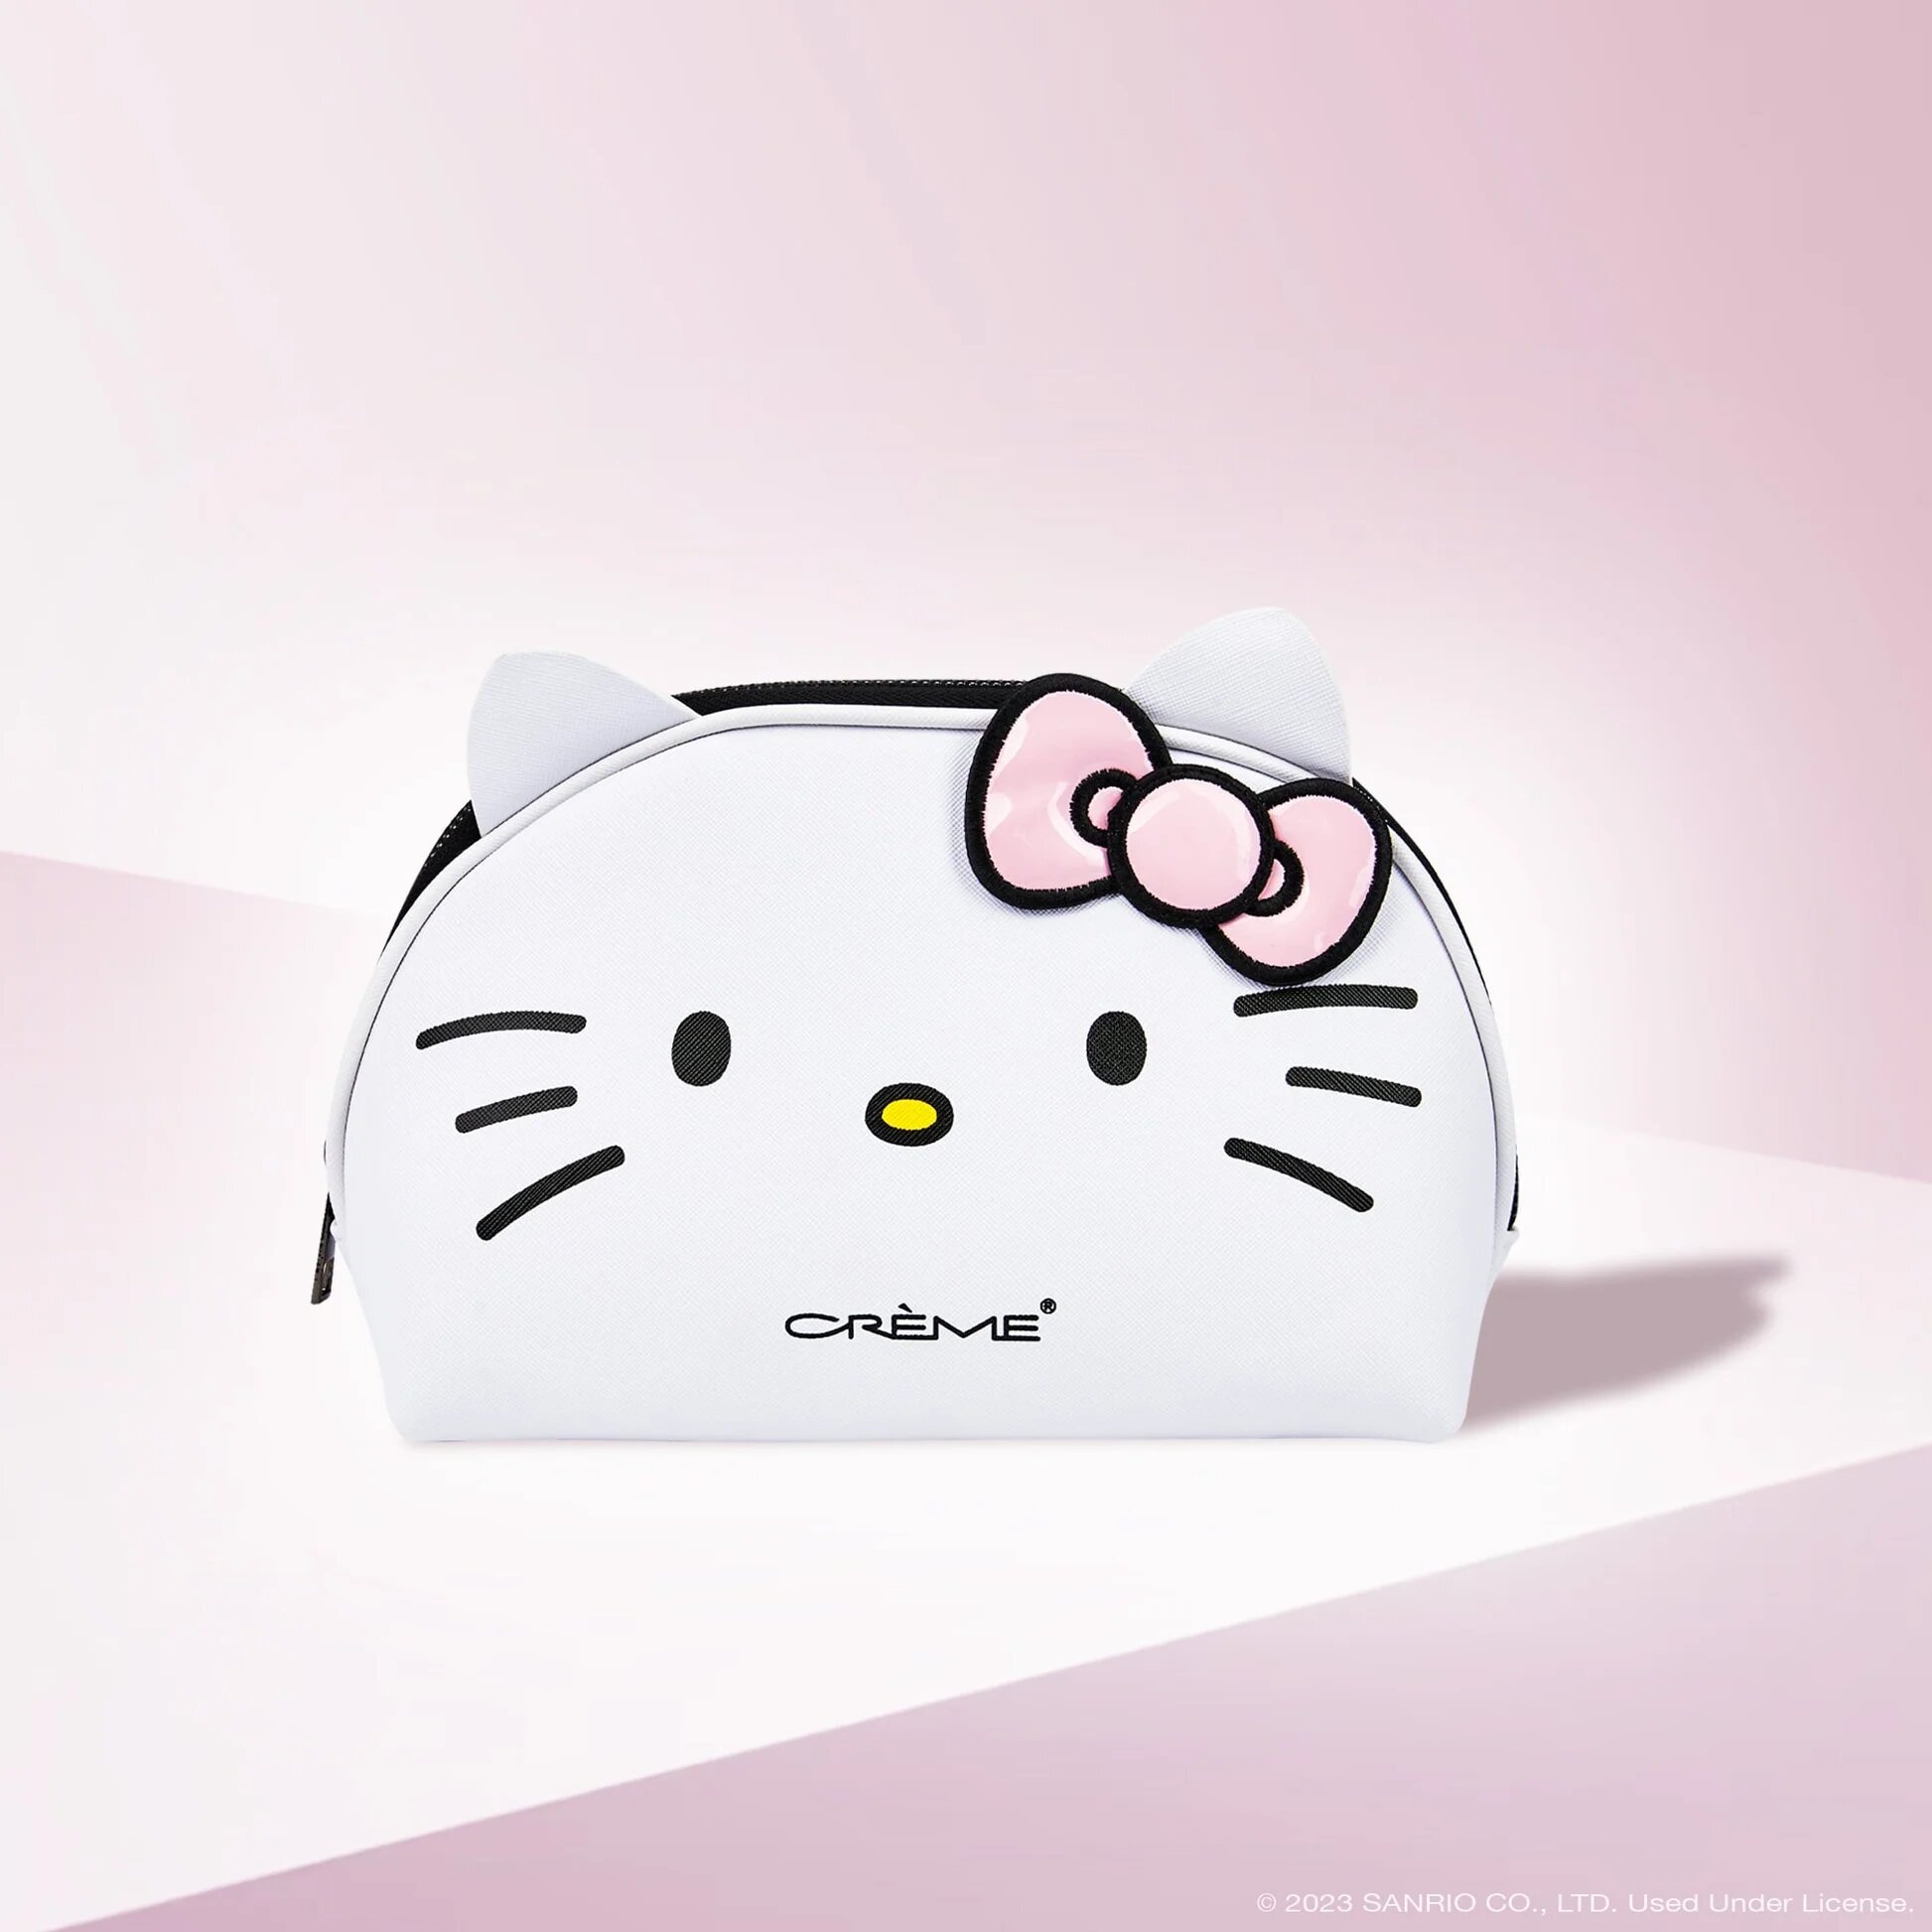 Impressions Vanity Hello Kitty Cosmetic Bag with Faux Leather, Travel Toiletry Bag with Inside Zipper Pockets, Waterproof Reusable Large Cosmetic